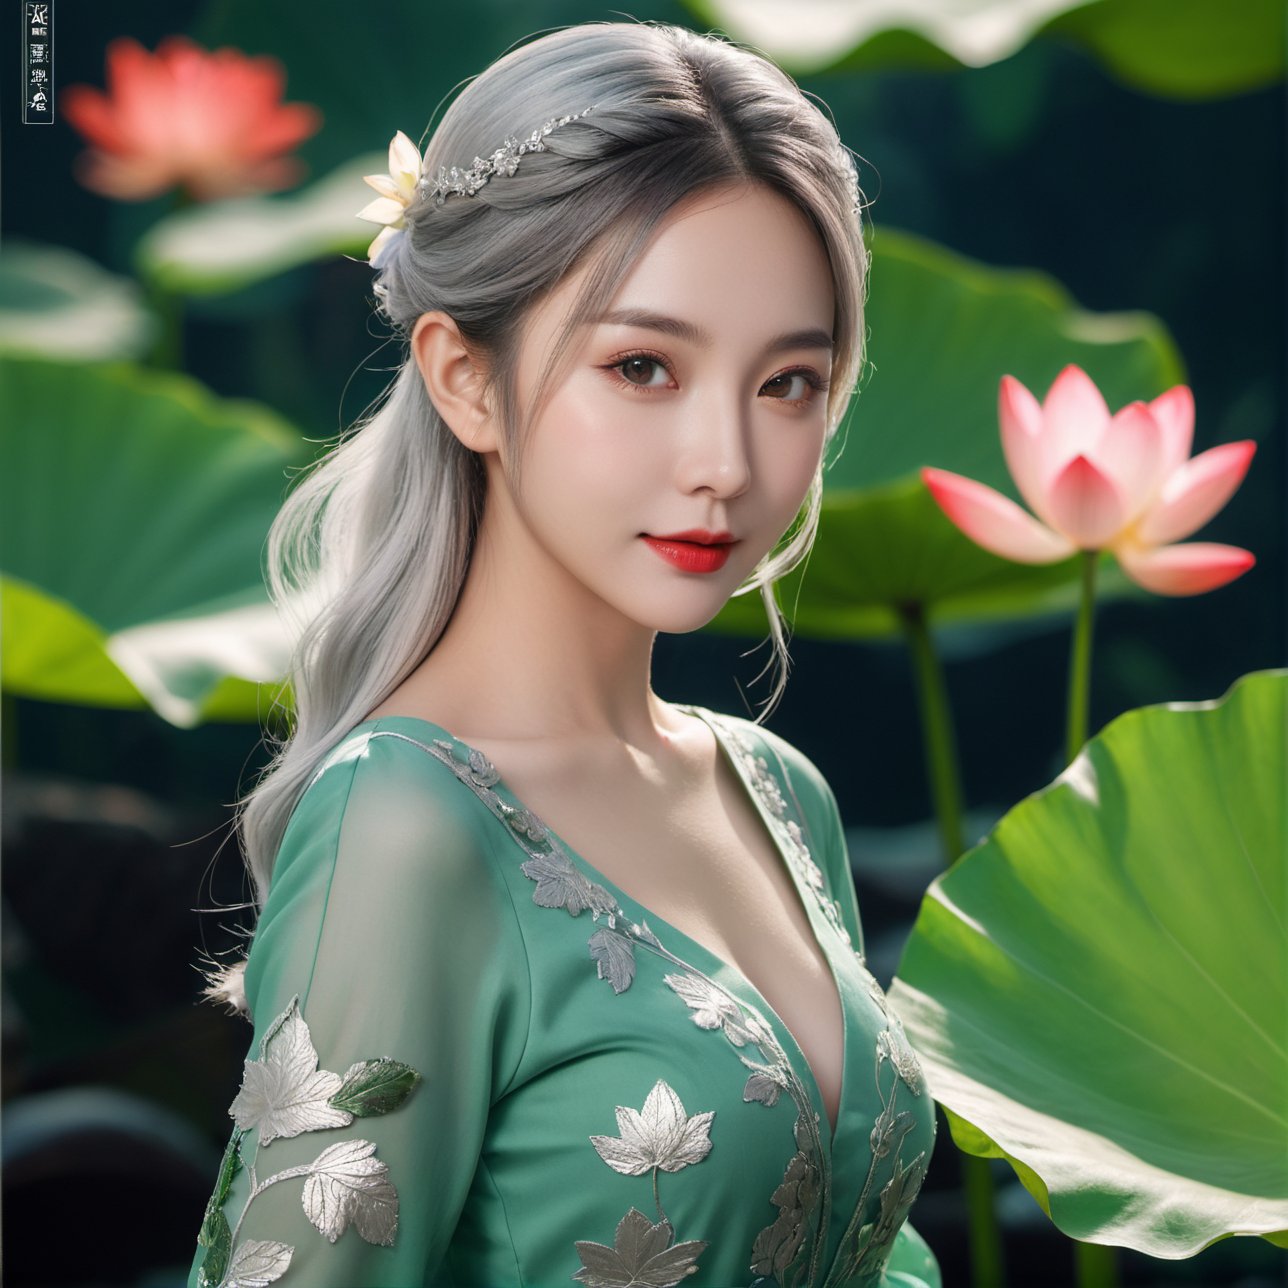 Best Quality, Masterpiece, Ultra High Resolution, (Realisticity:1.4), photorealistic, extreme detailed, Original Photo, 1girl, portrait, (fullbody), elf, silver hair, solo, (dynamic posture:1.4), ao dai, (dark sea green tone:1.2), giant lotus leaf, dress, looking at the audiences, long sleeves, red lips, smile, 50mm, F0.8, 8K raw, depth of field